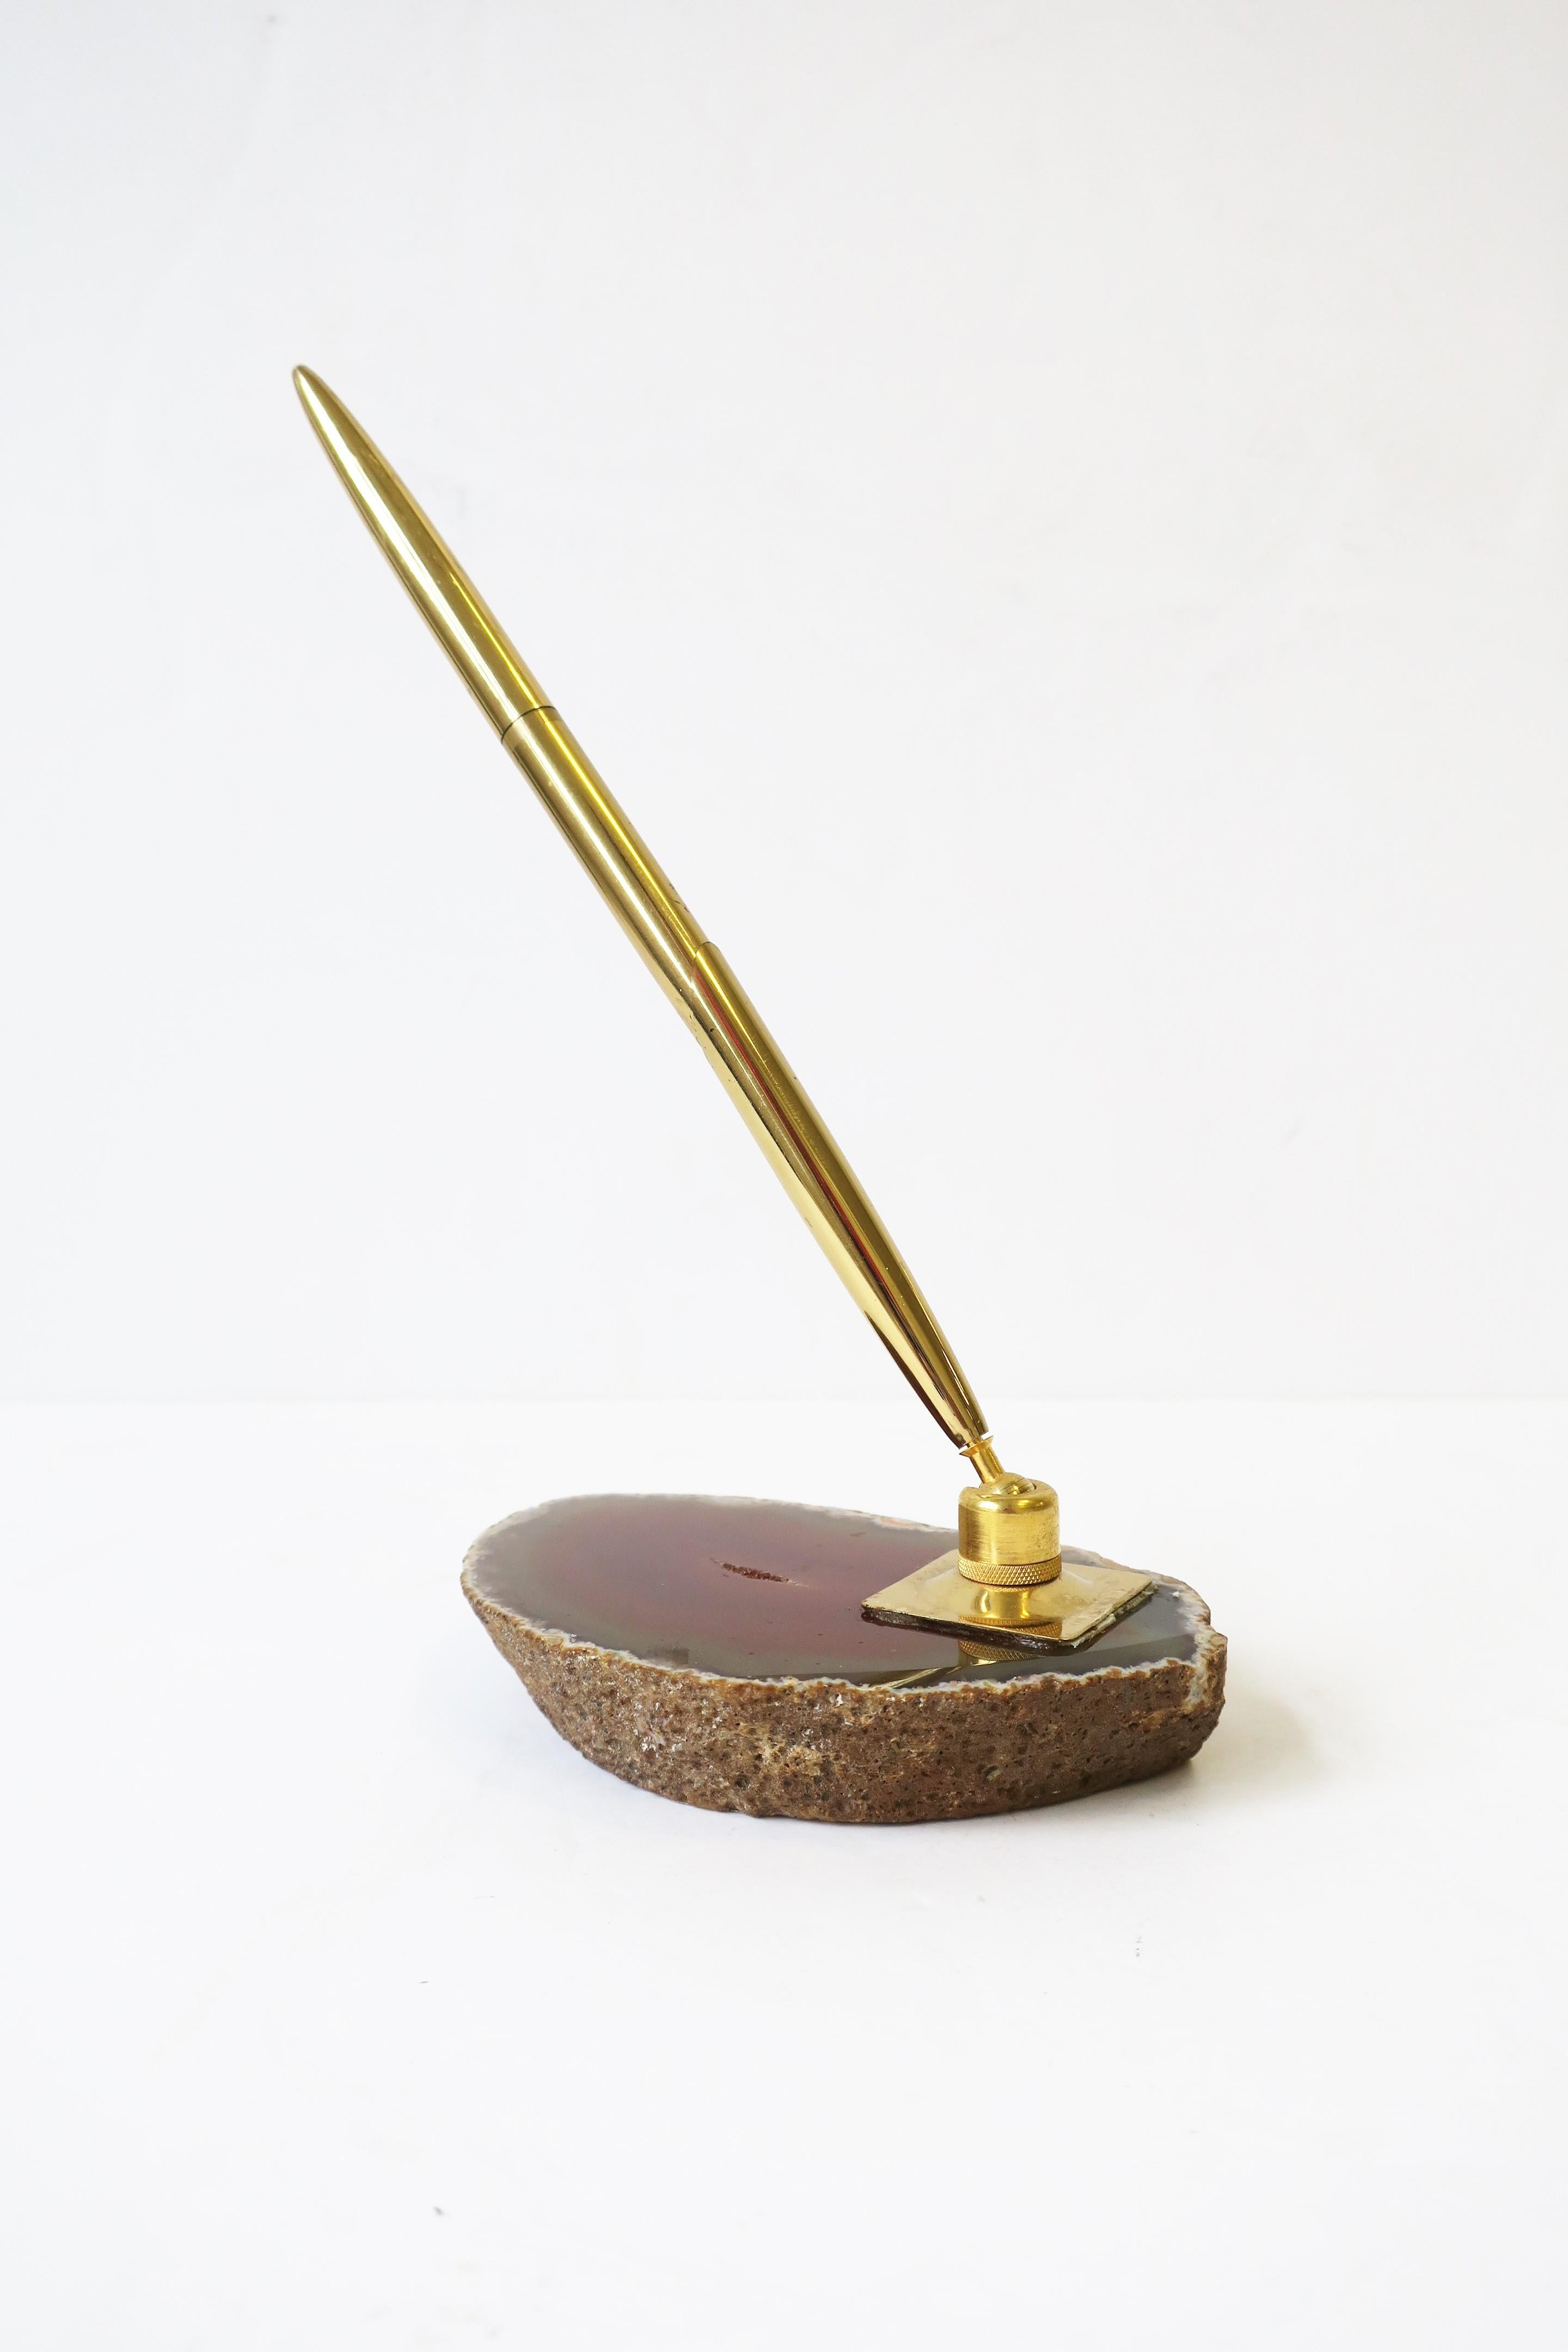 Agate Onyx and Brass Desk Pen Holder, circa 1970s For Sale 6